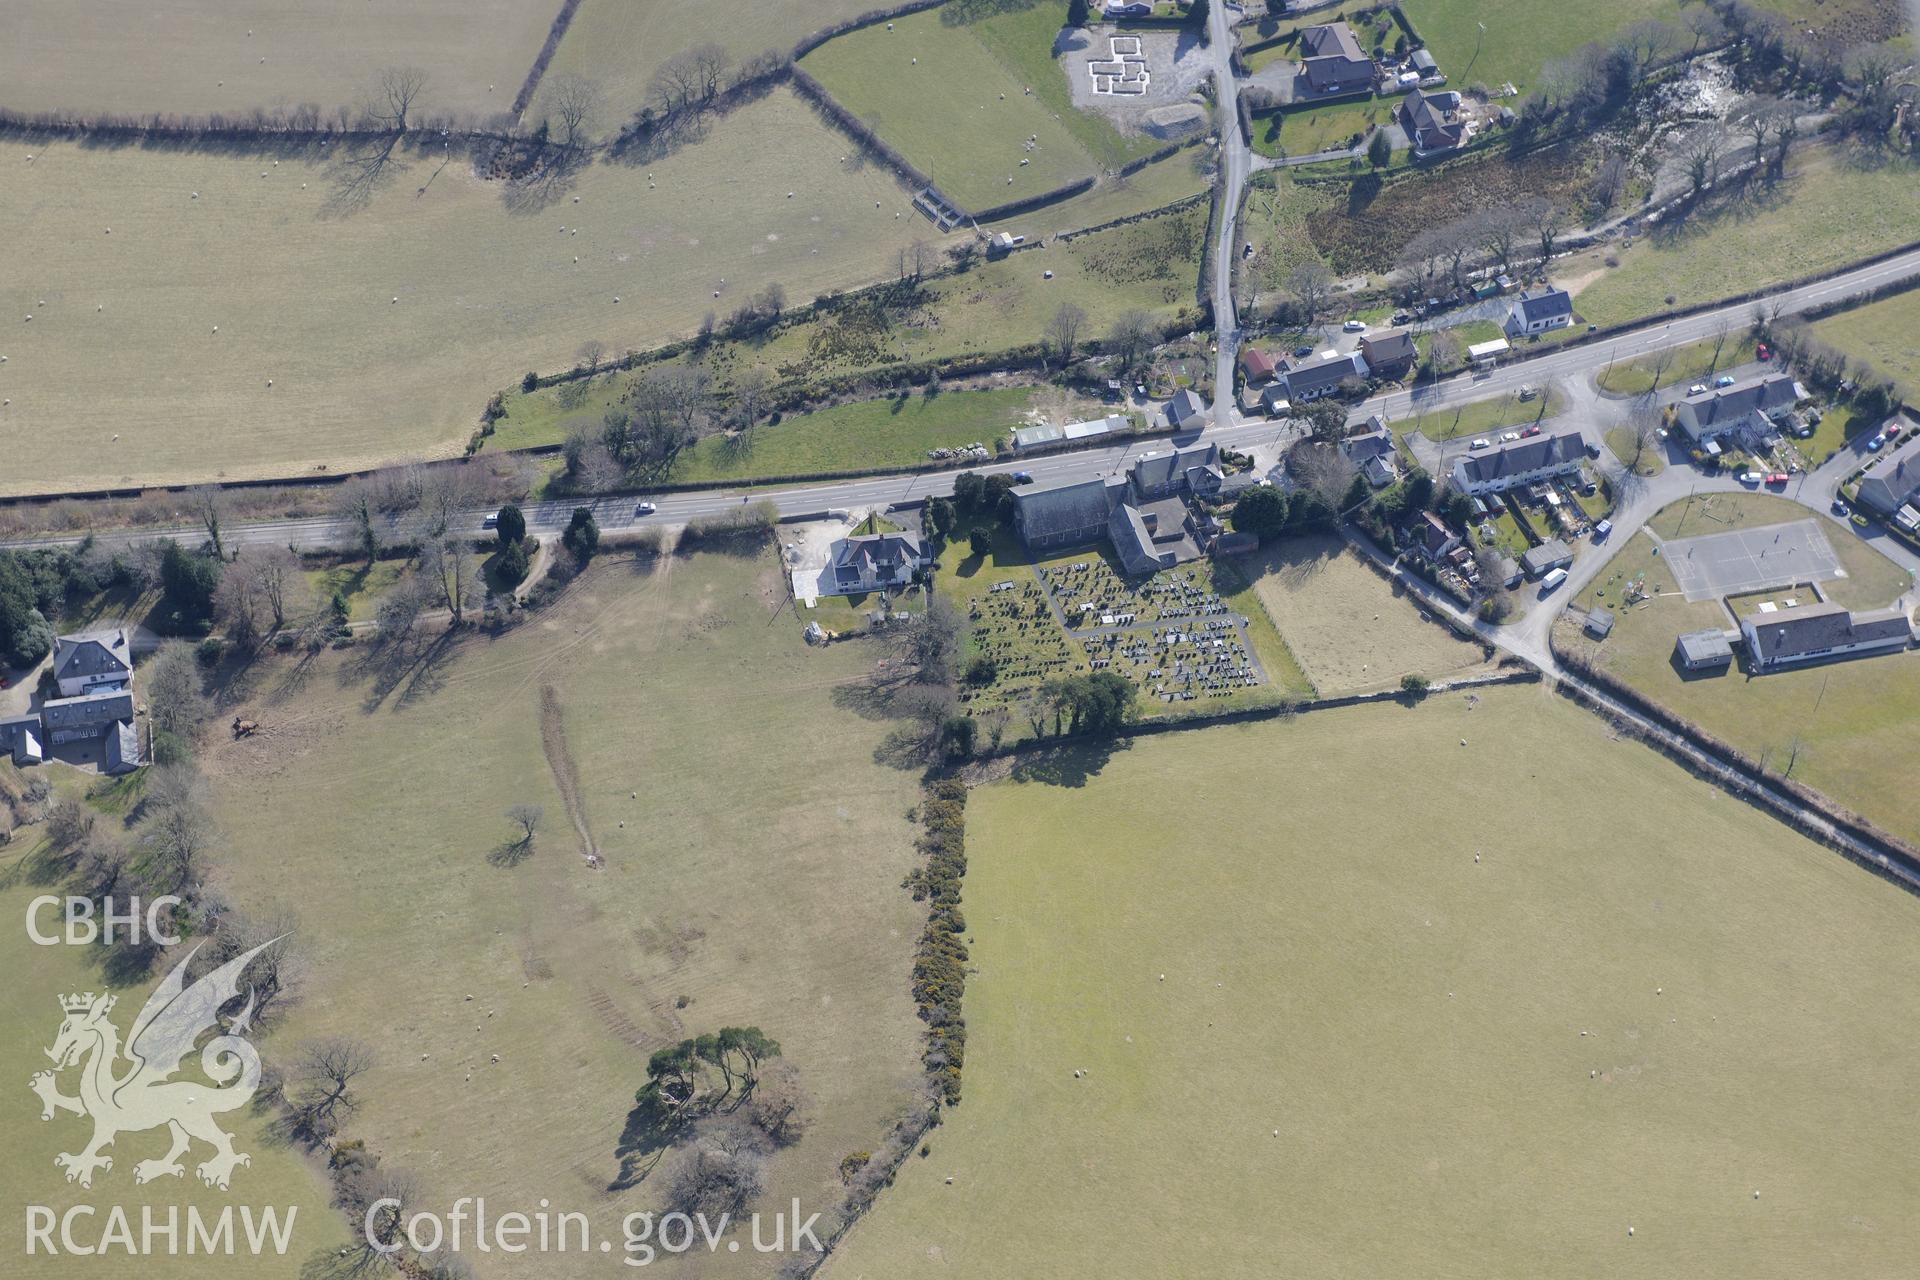 Penllwyn Welsh Calvinistic Methodist chapel and the burial site of Penllwyn chapel urn, Capel Bangor. Oblique aerial photograph taken during the Royal Commission's programme of archaeological aerial reconnaissance by Toby Driver on 2nd April 2013.